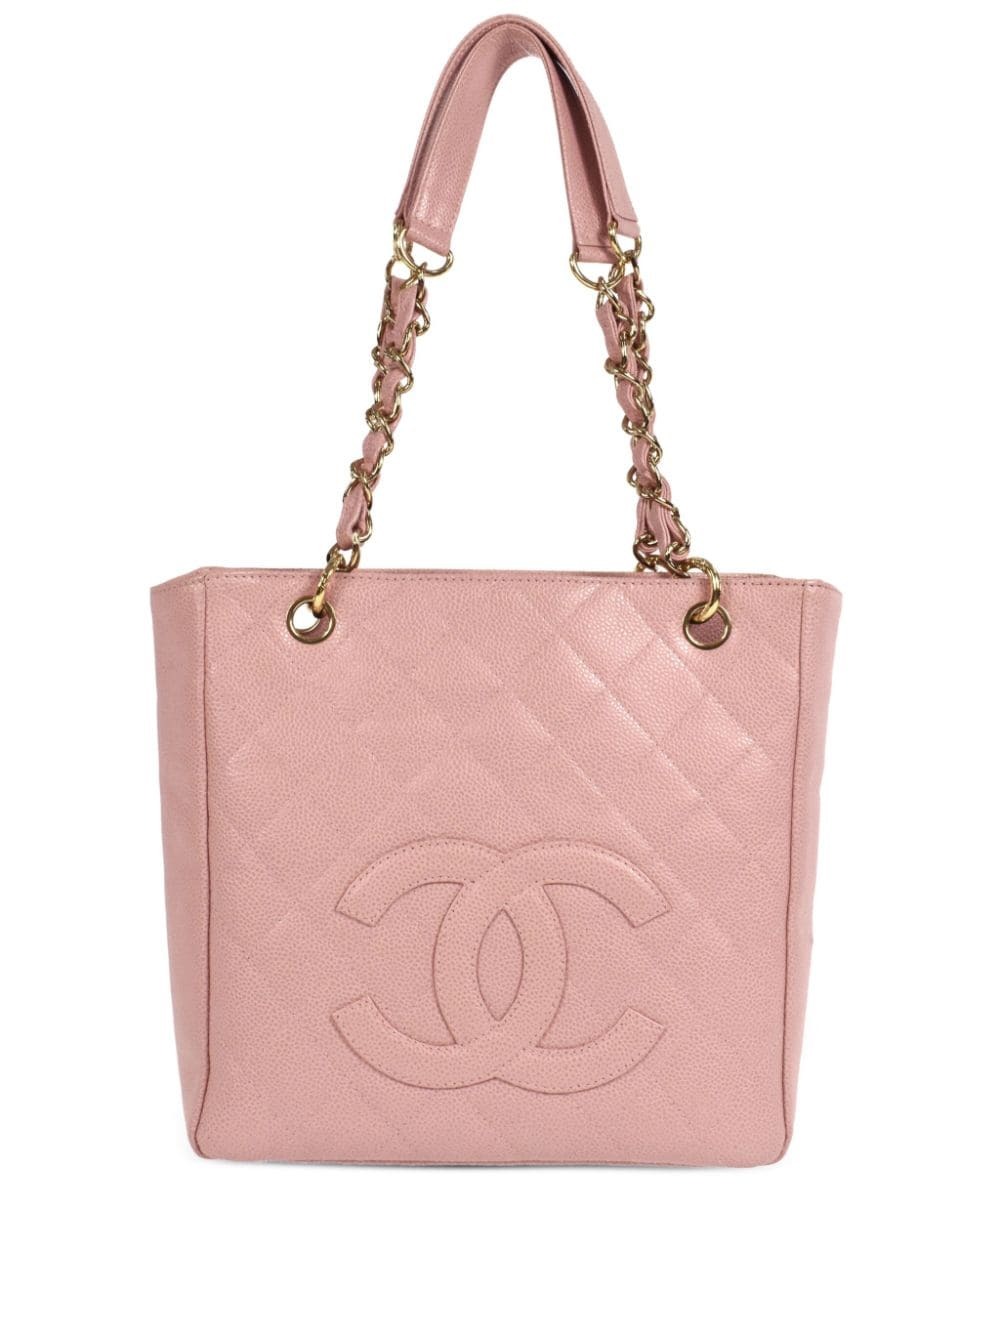 CHANEL Pre-Owned 2003 Petite Shopping Tote bag - Pink